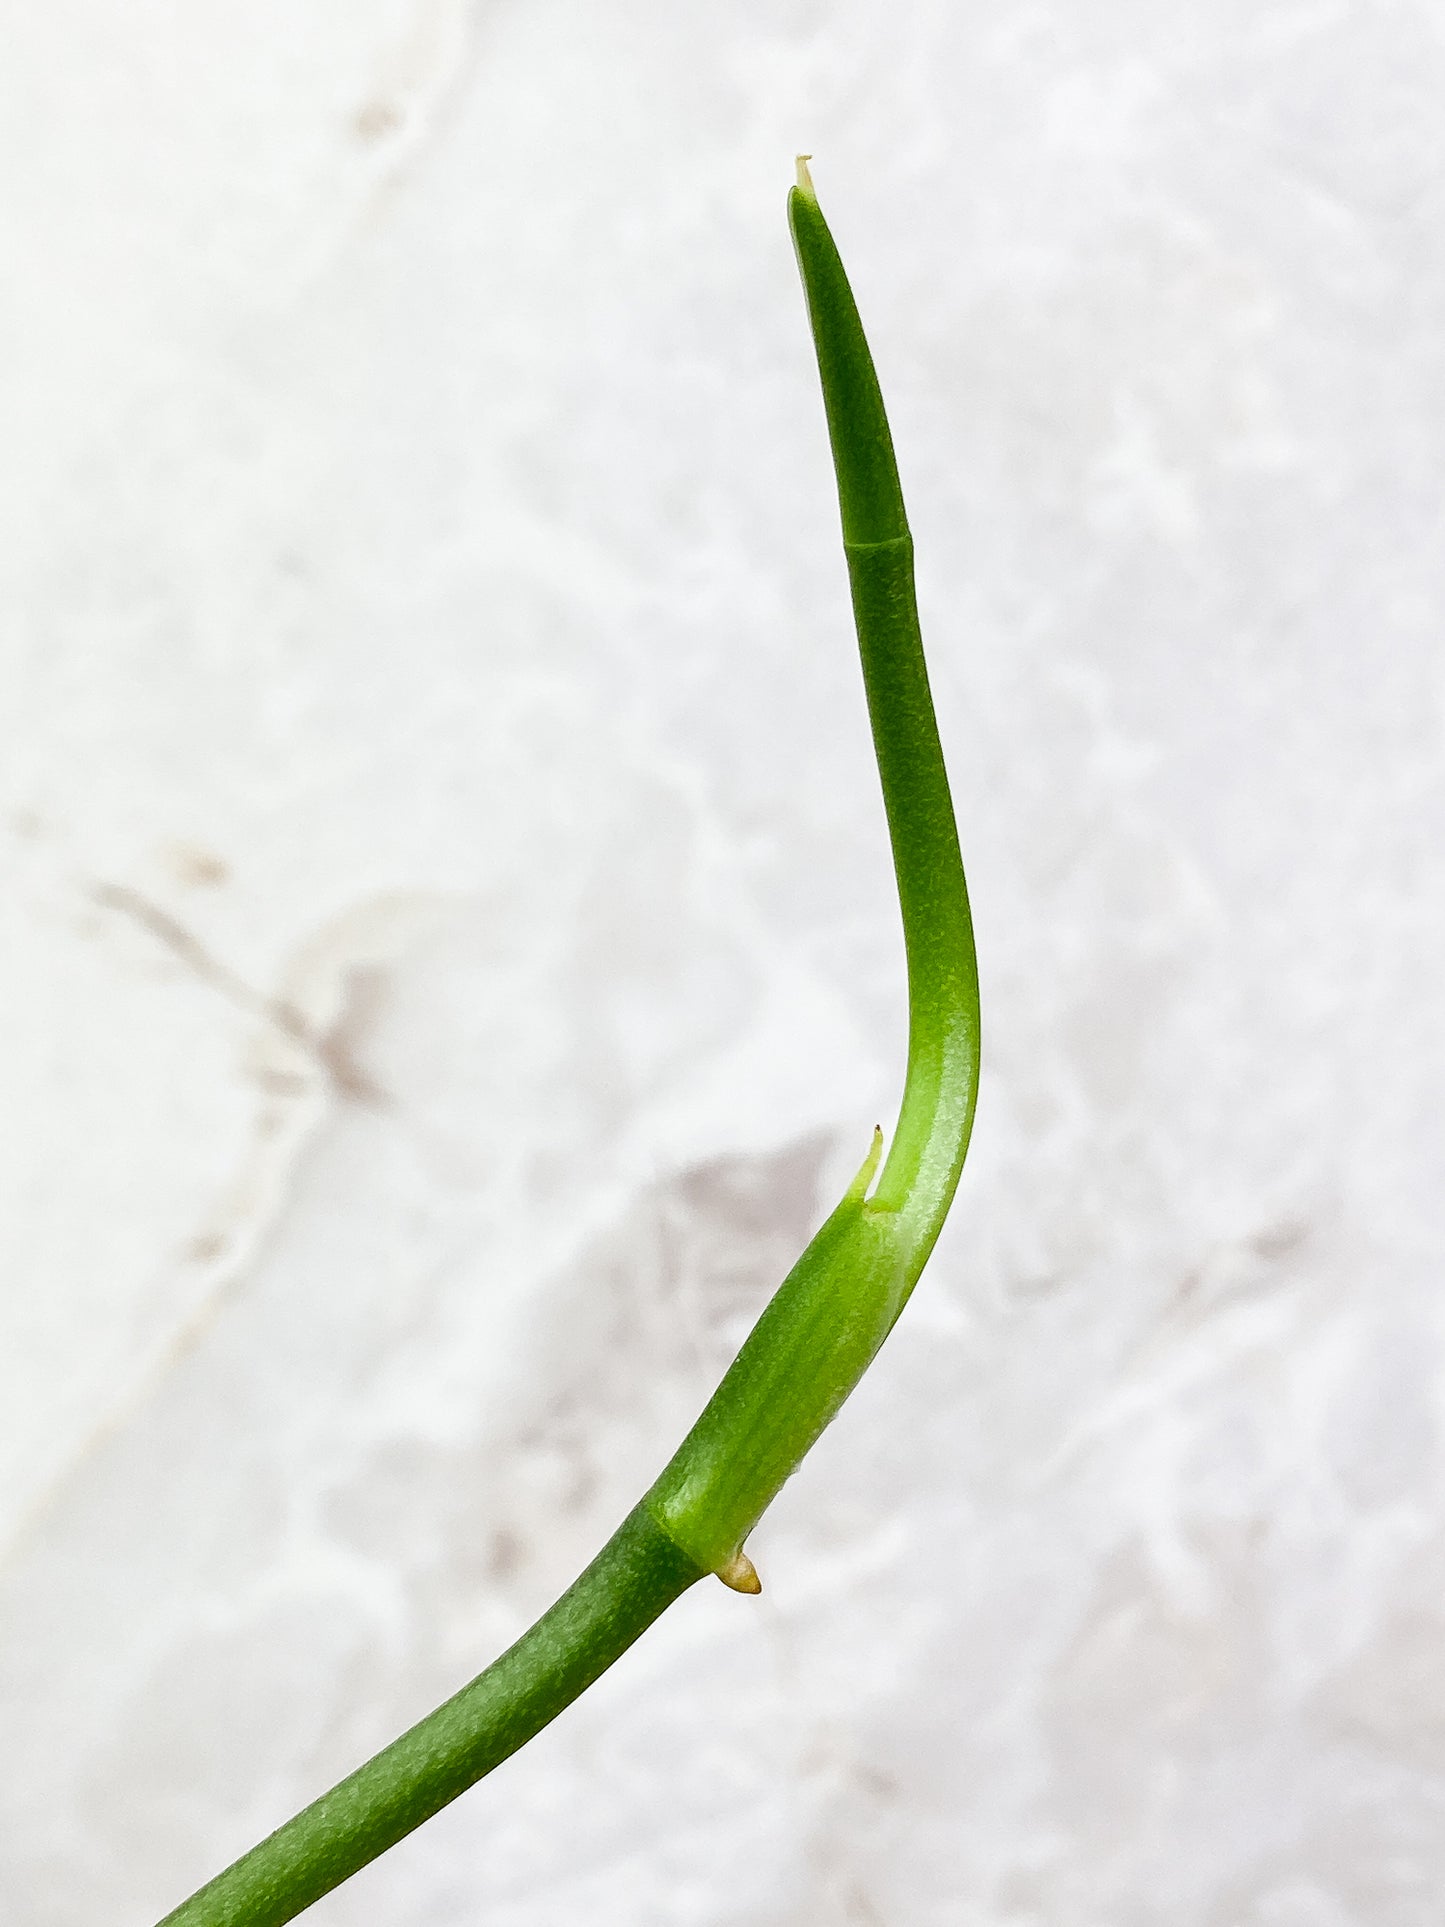 Monstera Esqueleto 1 leaf 1 sprout rooted